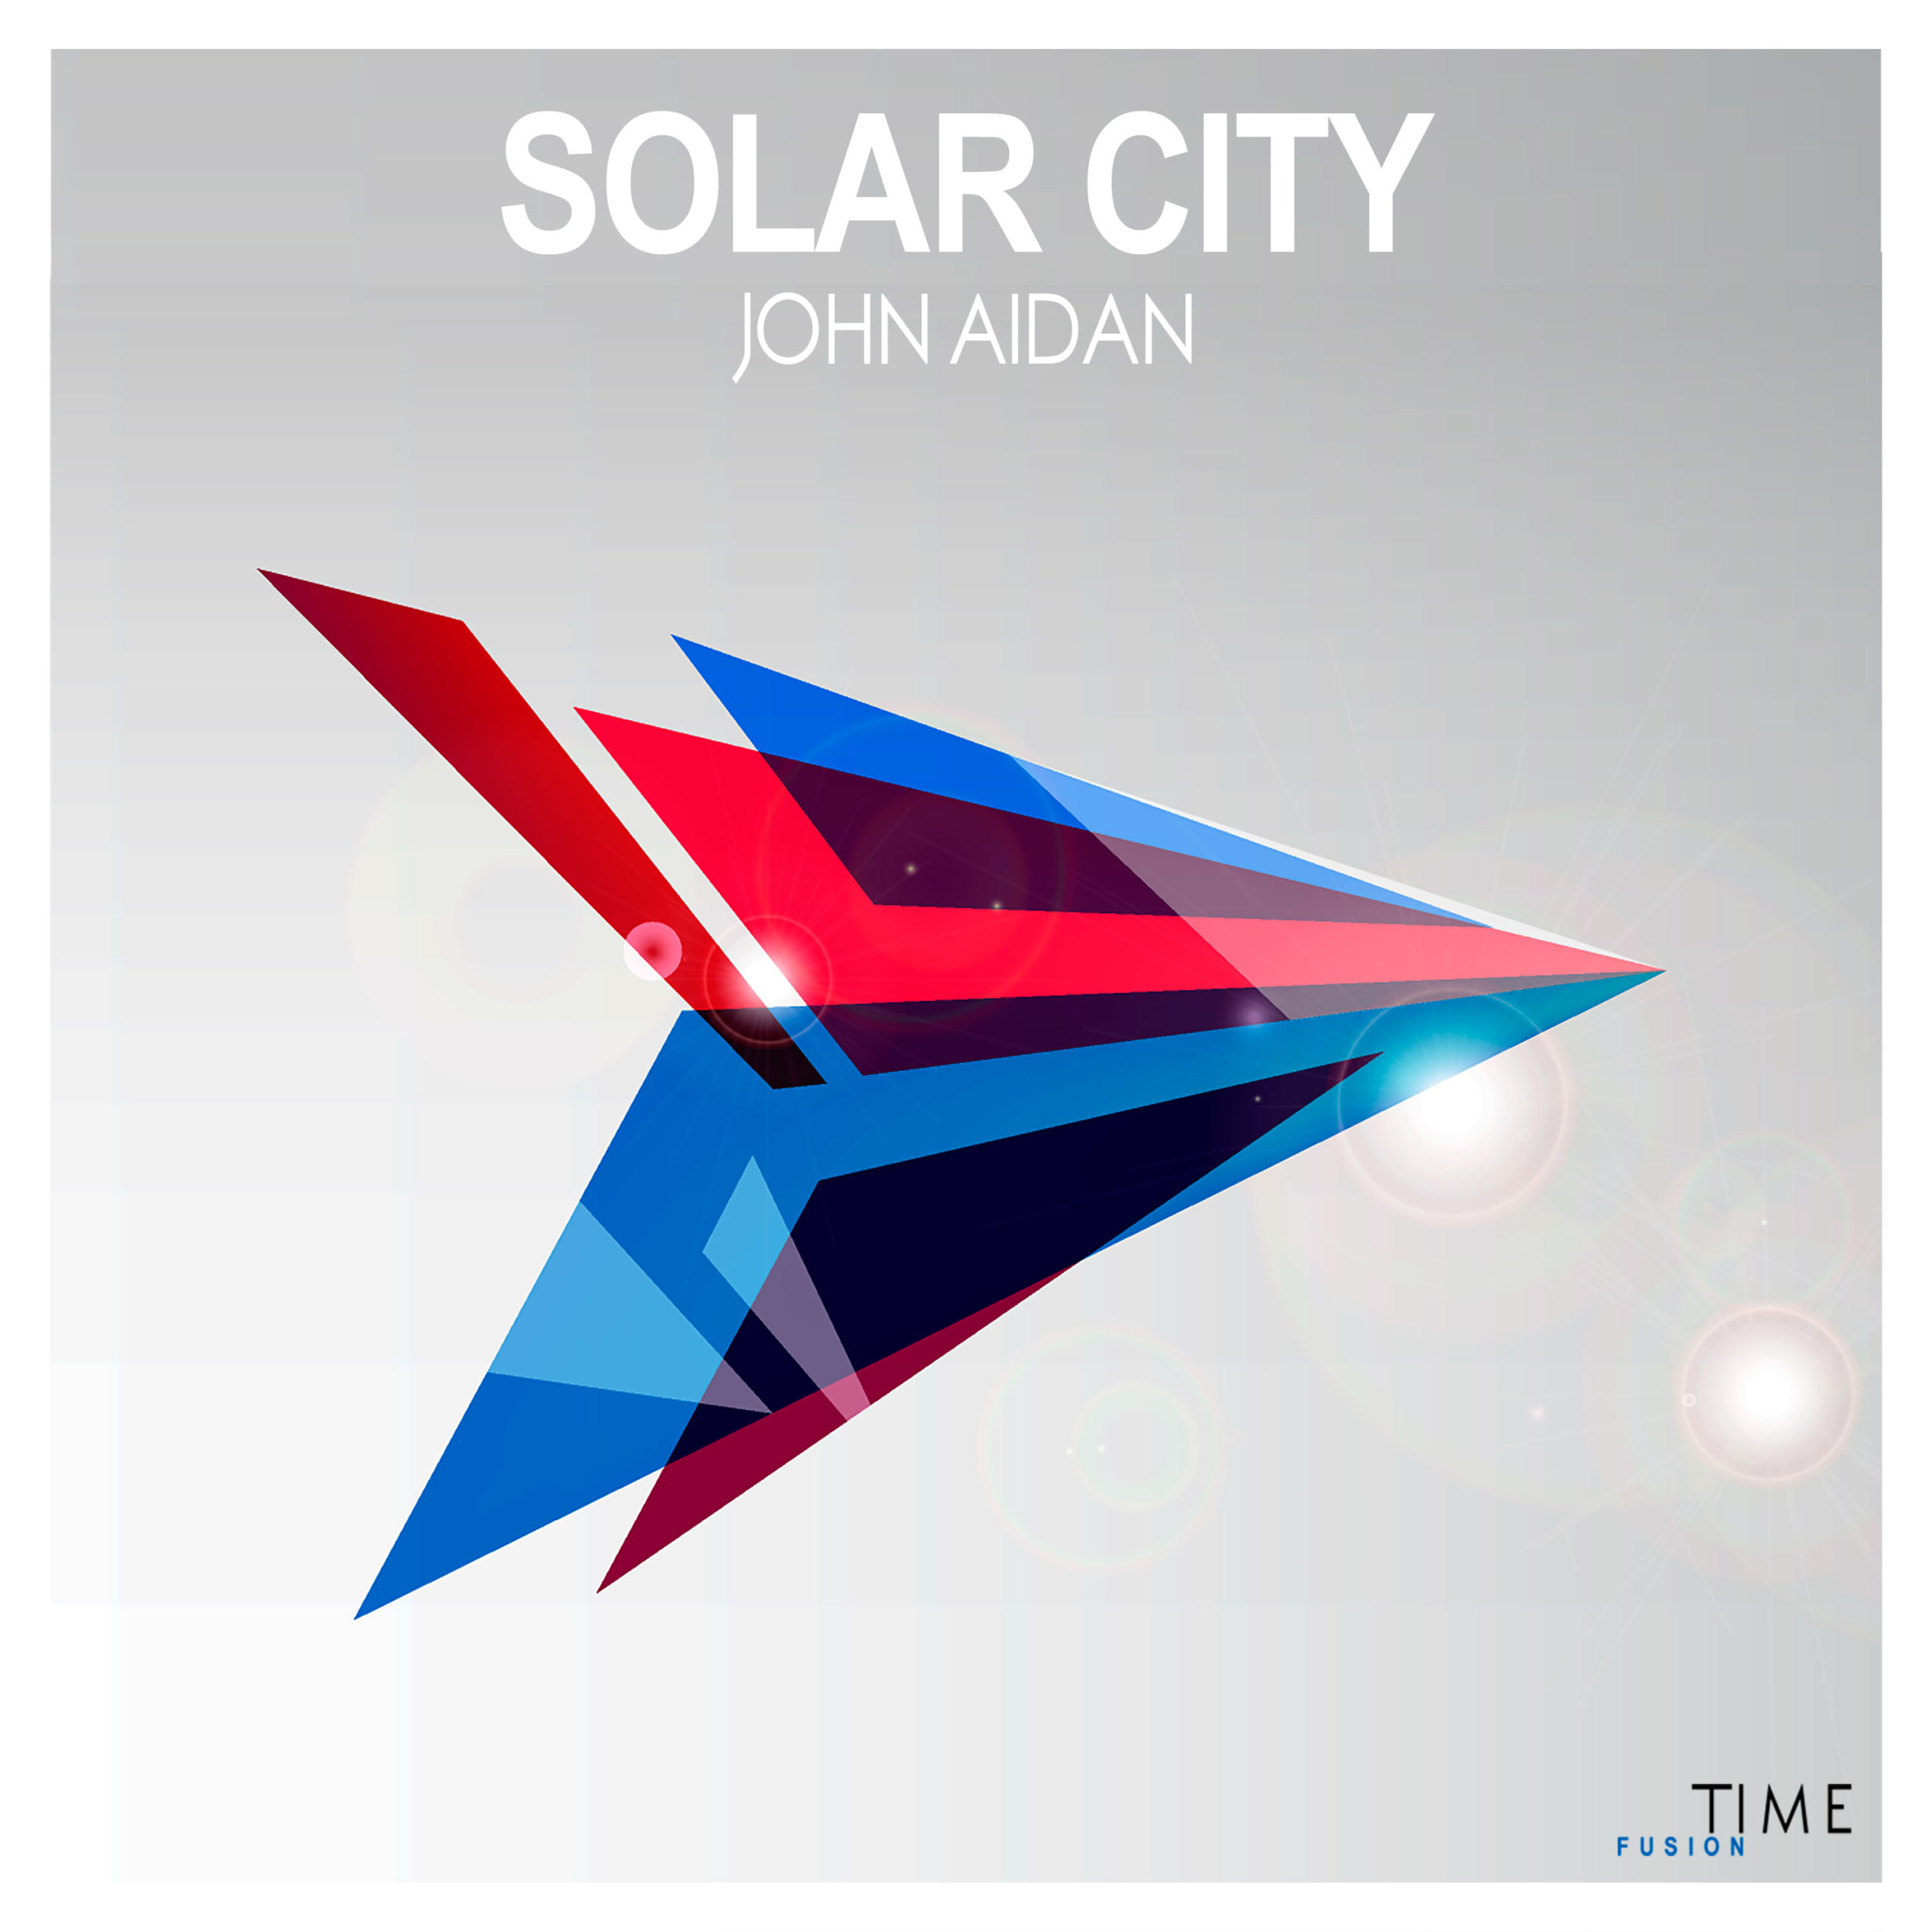 https://www.ultimate-house-records.com/wp-content/uploads/2022/09/John_Aidan-Solar_City_Cover_3000px_web-scaled.jpg